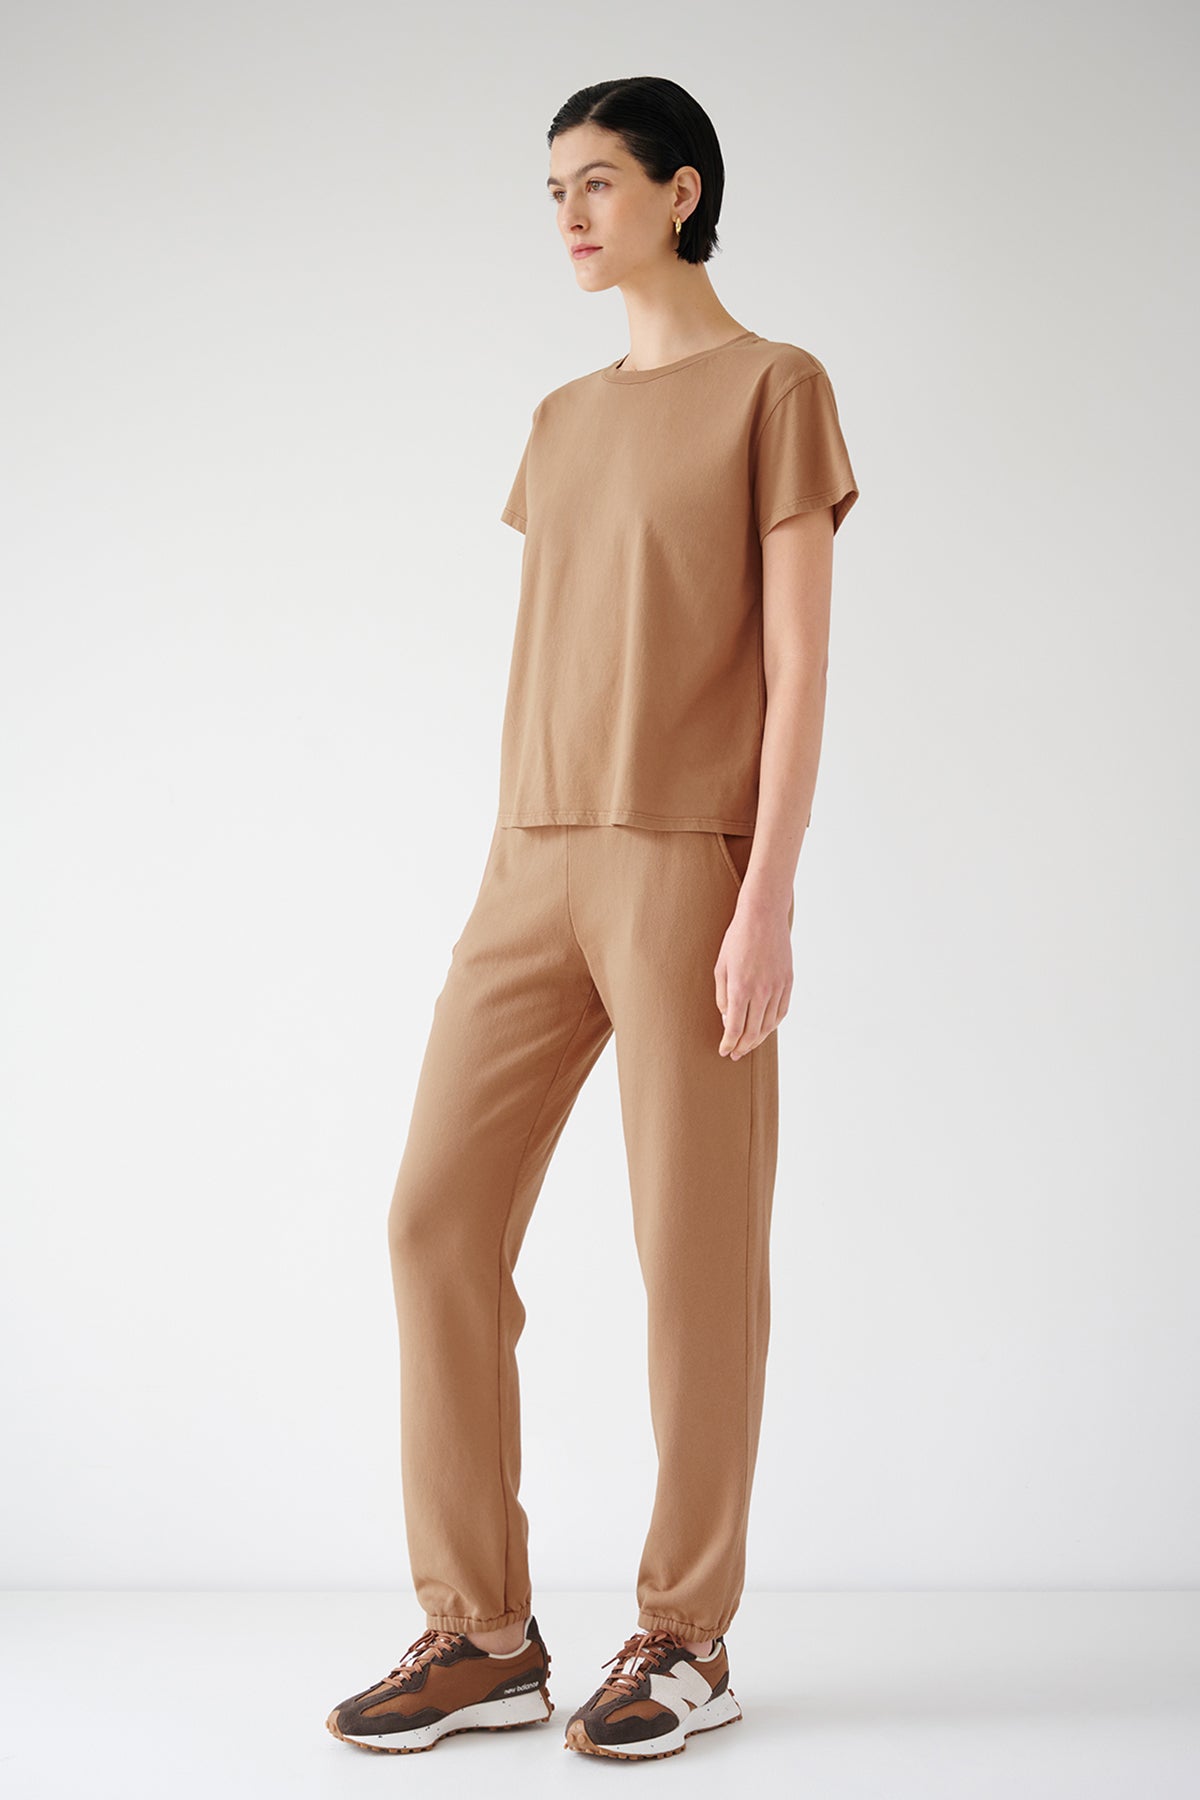 The model is wearing a tan t-shirt and Velvet by Jenny Graham ZUMA SWEATPANT.-35547979120833